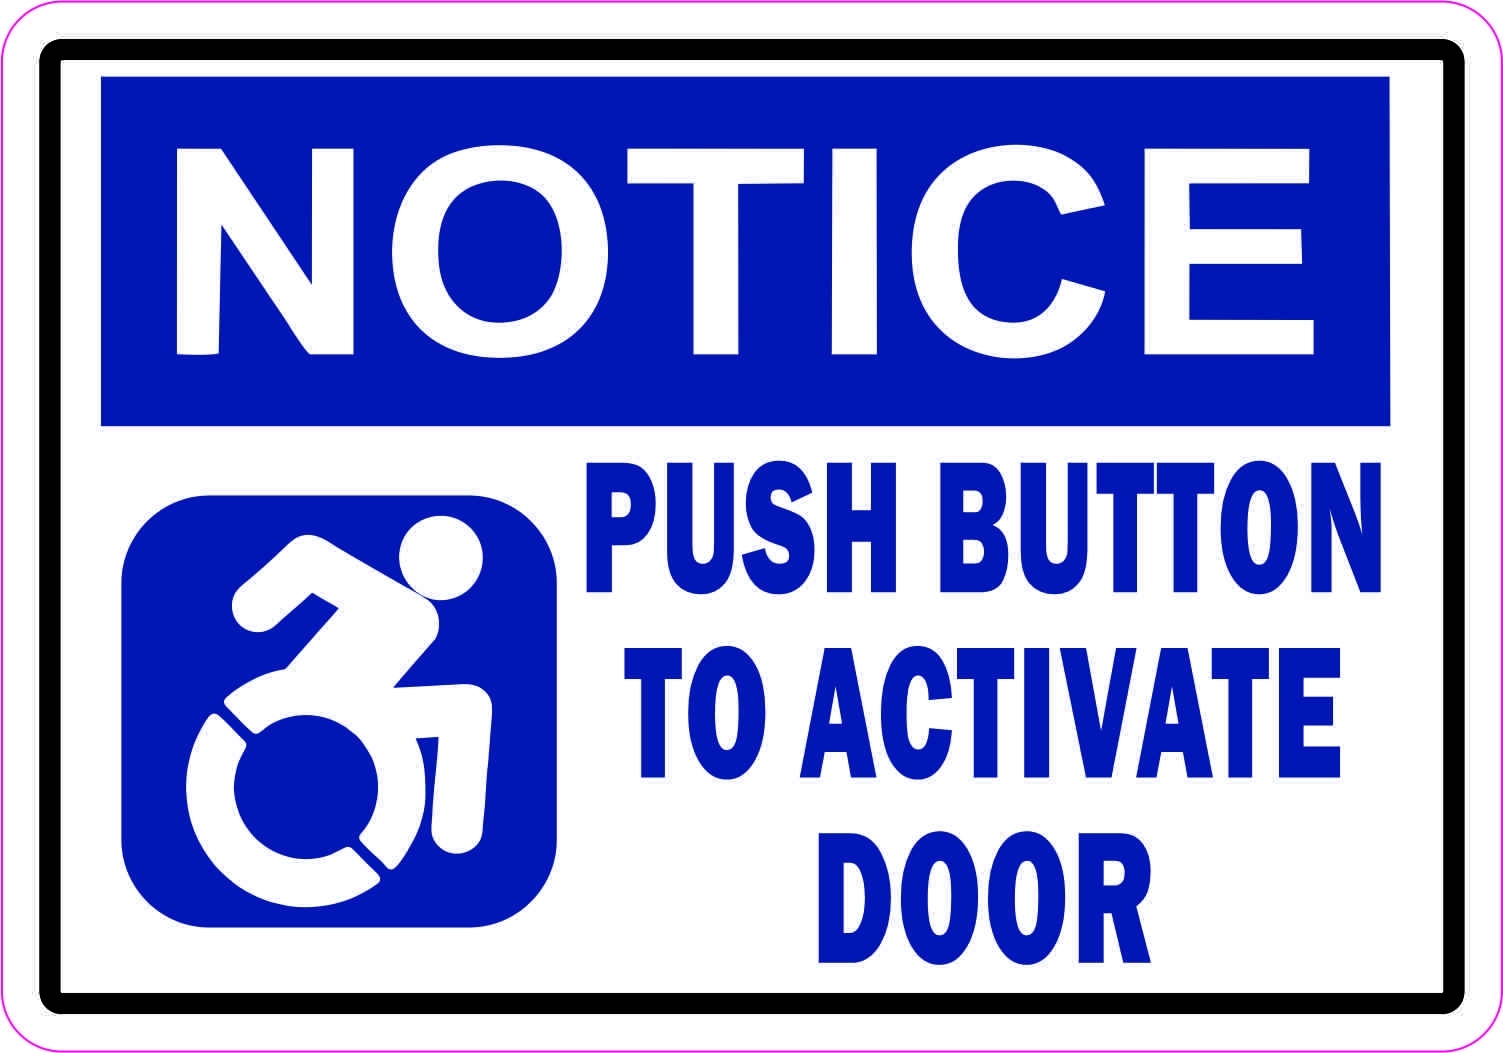 Person in a wheelchair with wording that states "Notice, push button to activate door"